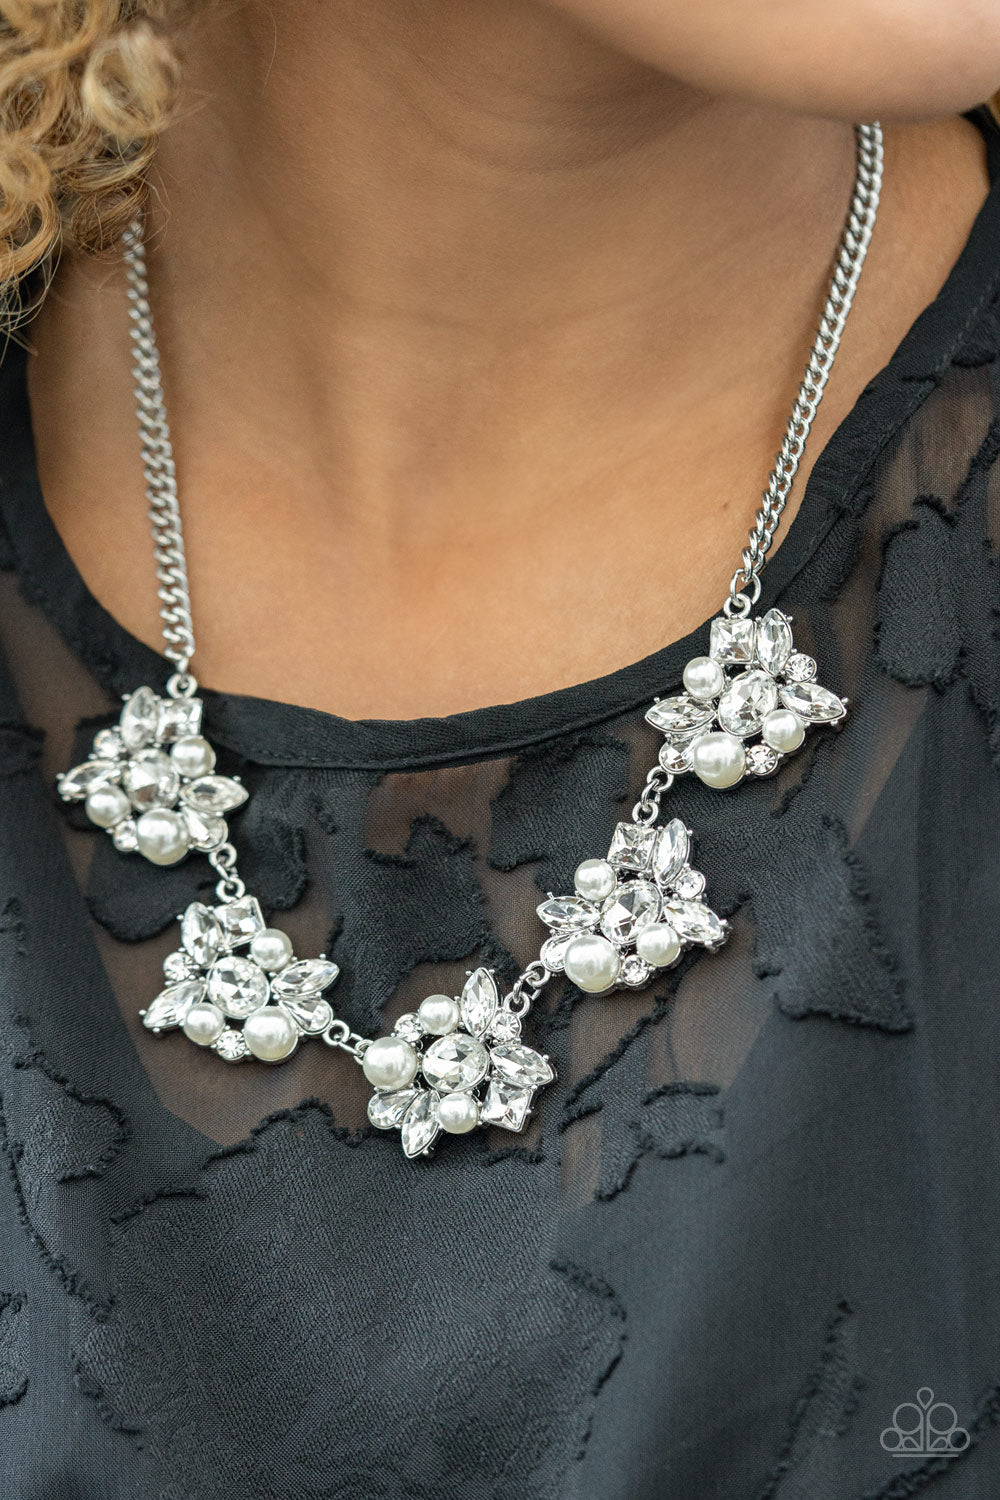 Paparazzi Accessories - HEIRESS of Them All - #N511 White Necklace